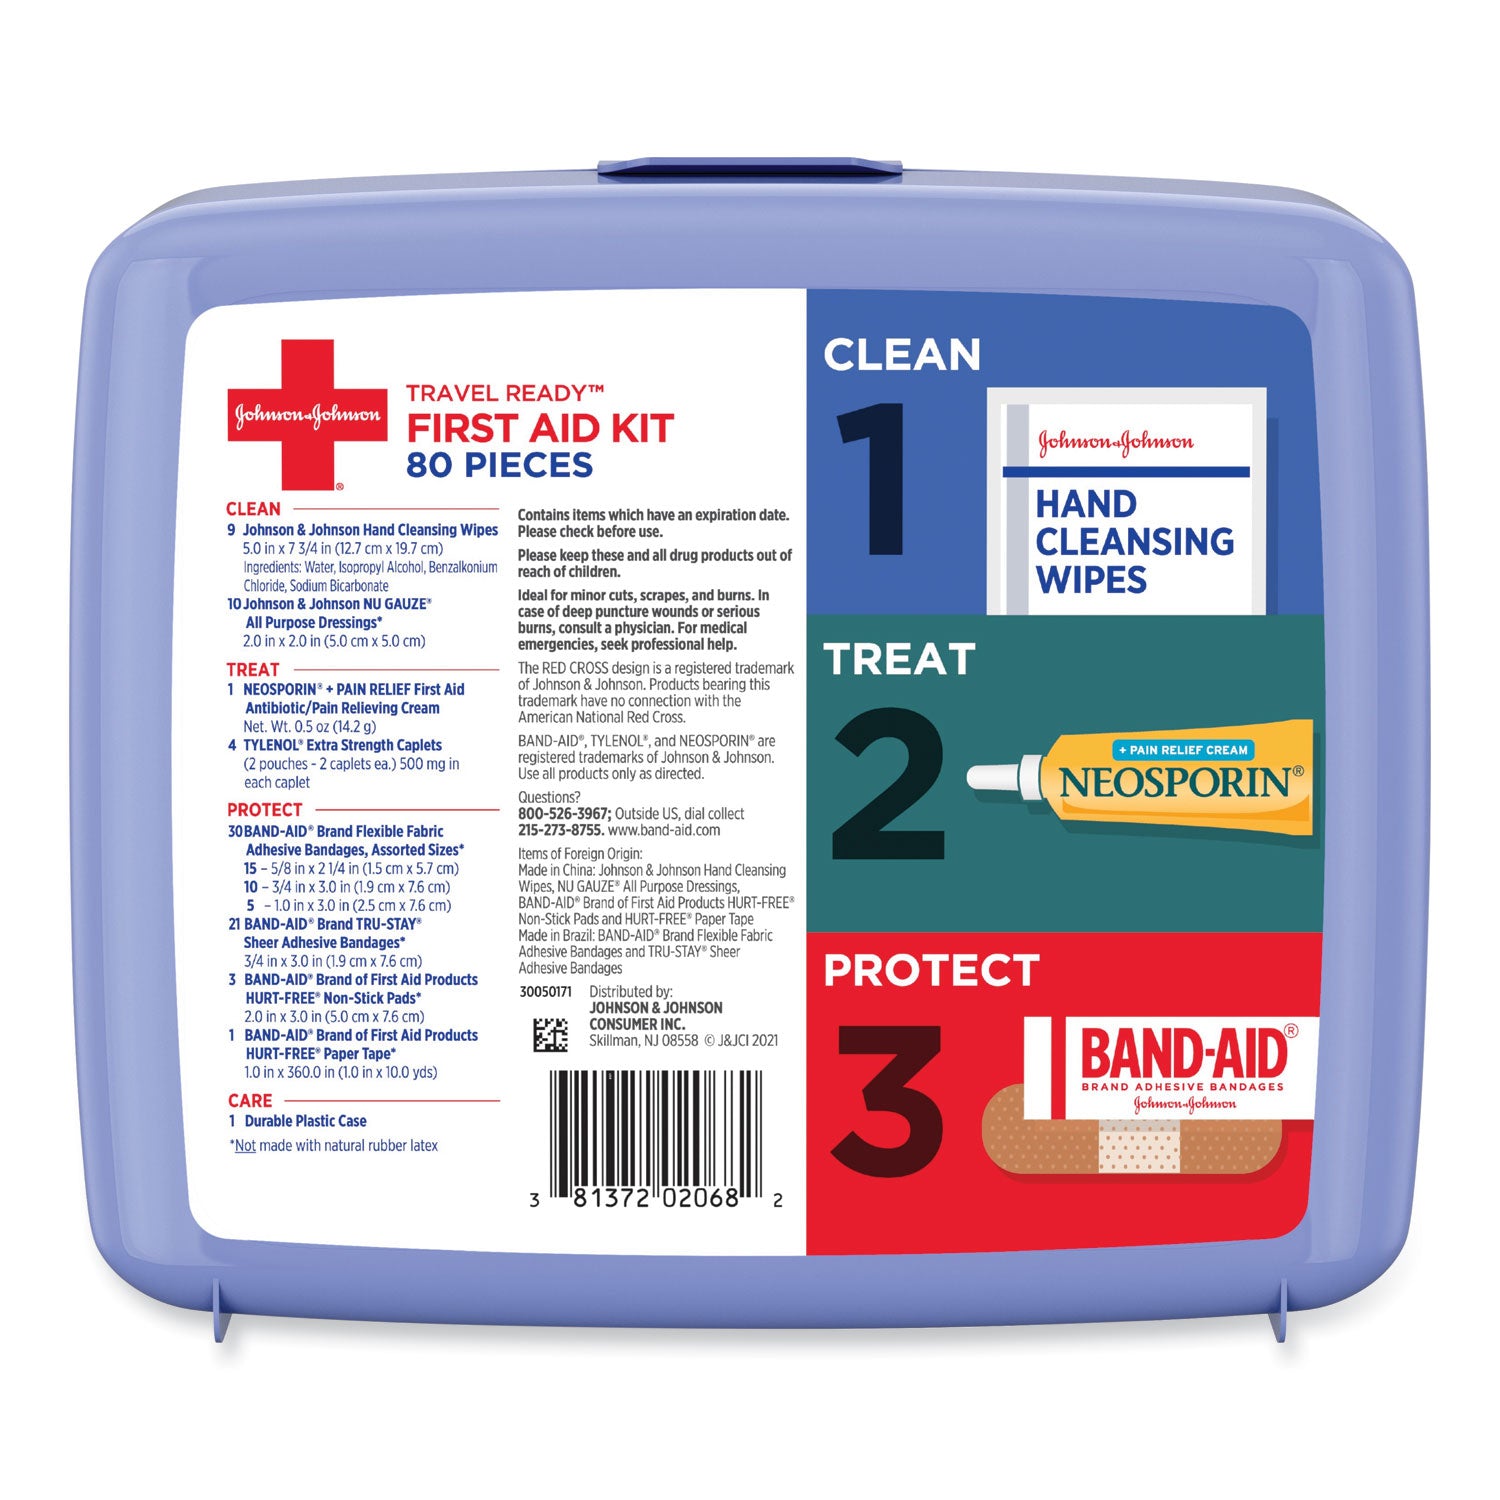 red-cross-travel-ready-portable-emergency-first-aid-kit-80-pieces-plastic-case_joj202068 - 3